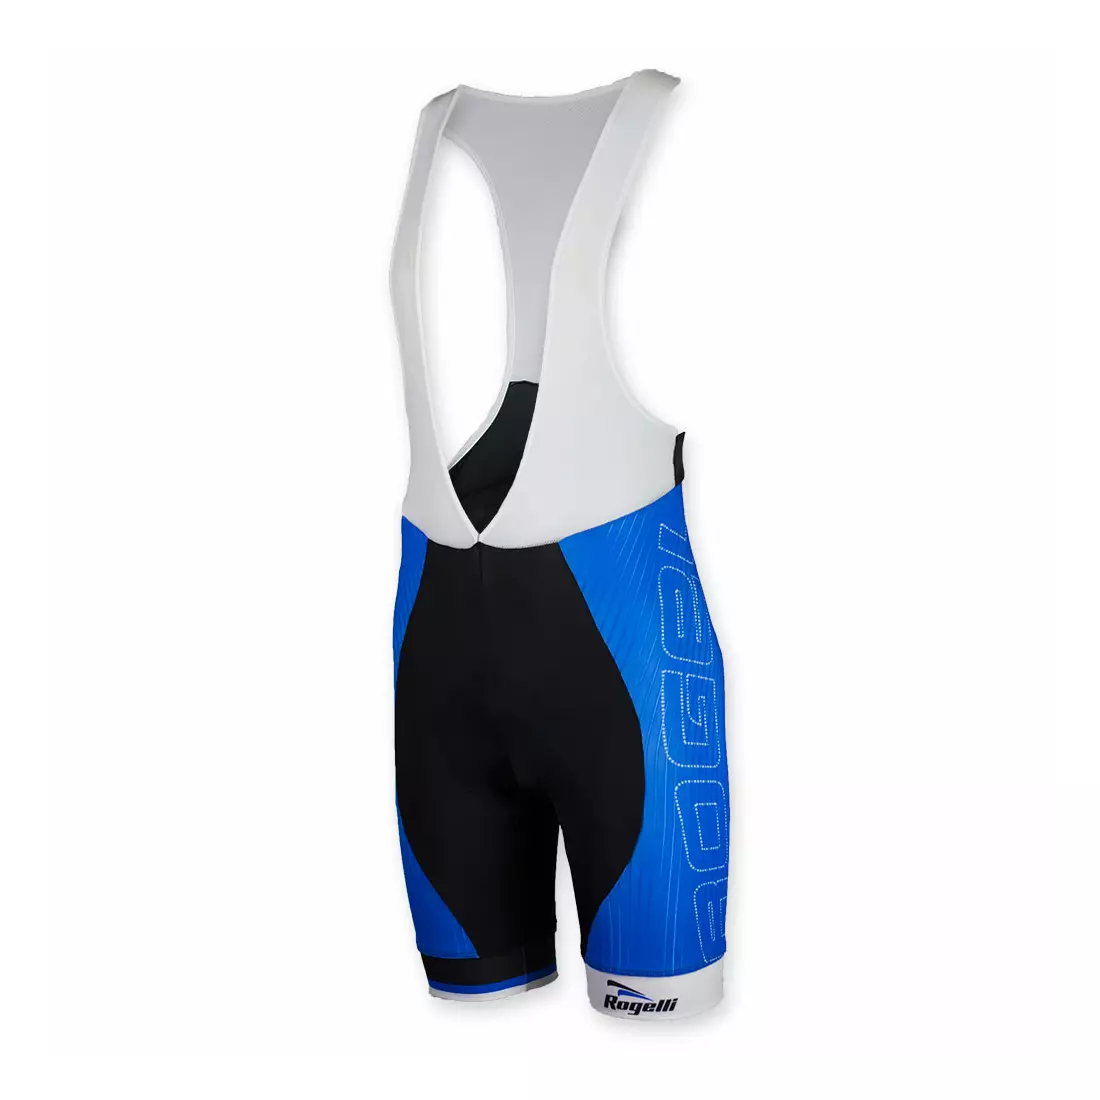 ROGELLI BIKE 002.439 ANDRANO men's cycling shorts, color: black and blue